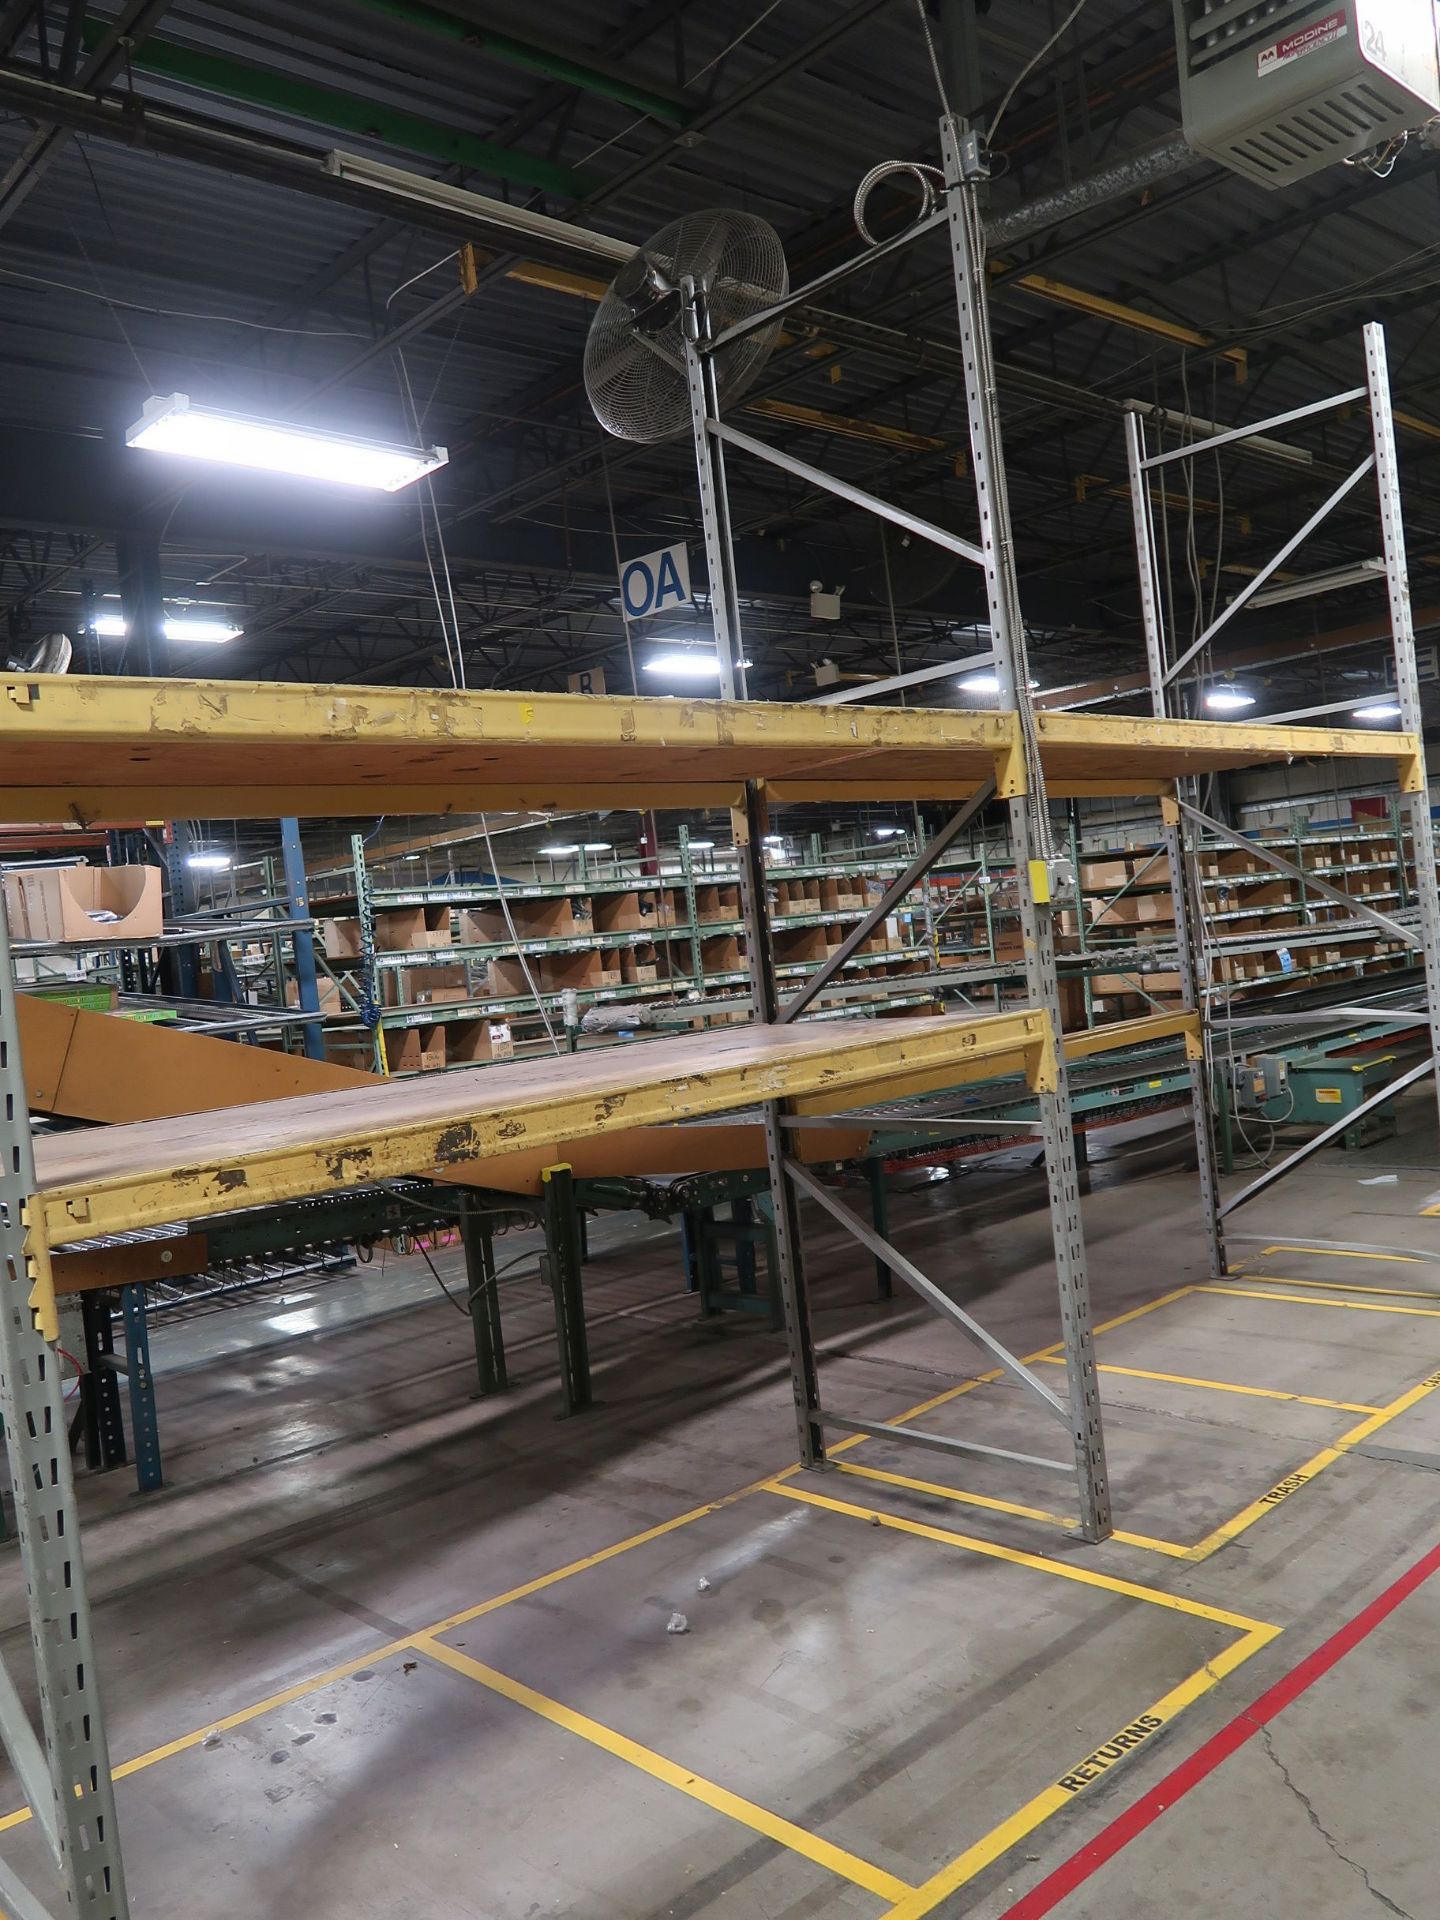 SECTIONS 96" X 42" X 144" ADJUSTABLE BEAM PALLET RACK; (3) 42" X 144" UPRIGHTS, (6) 96" CROSSBEAMS